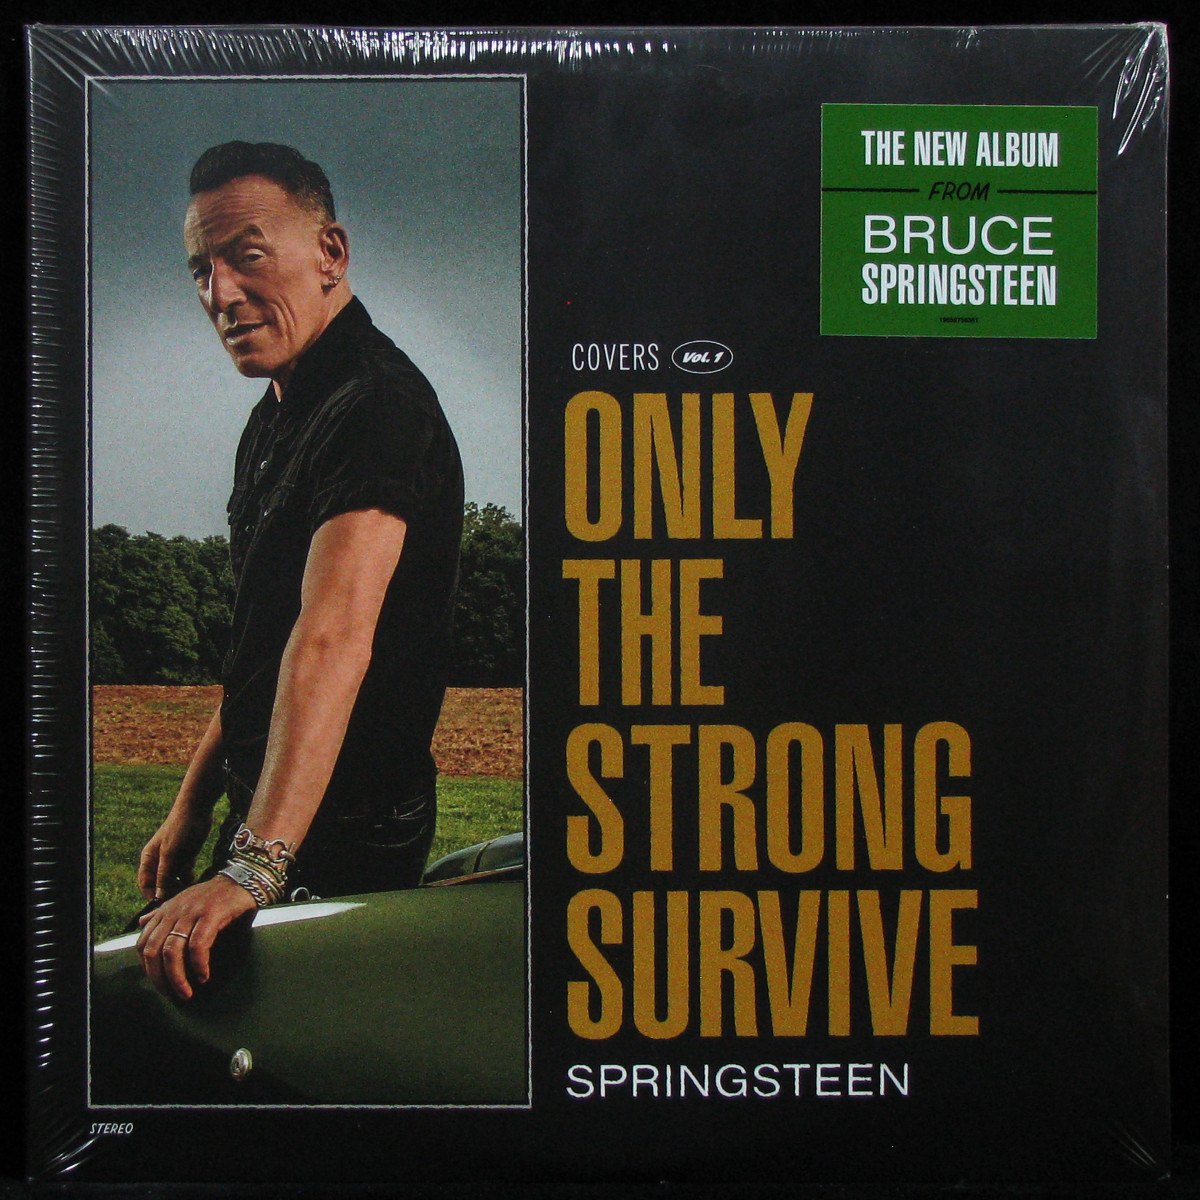 Only The Strong Survive (Covers Vol. 1)